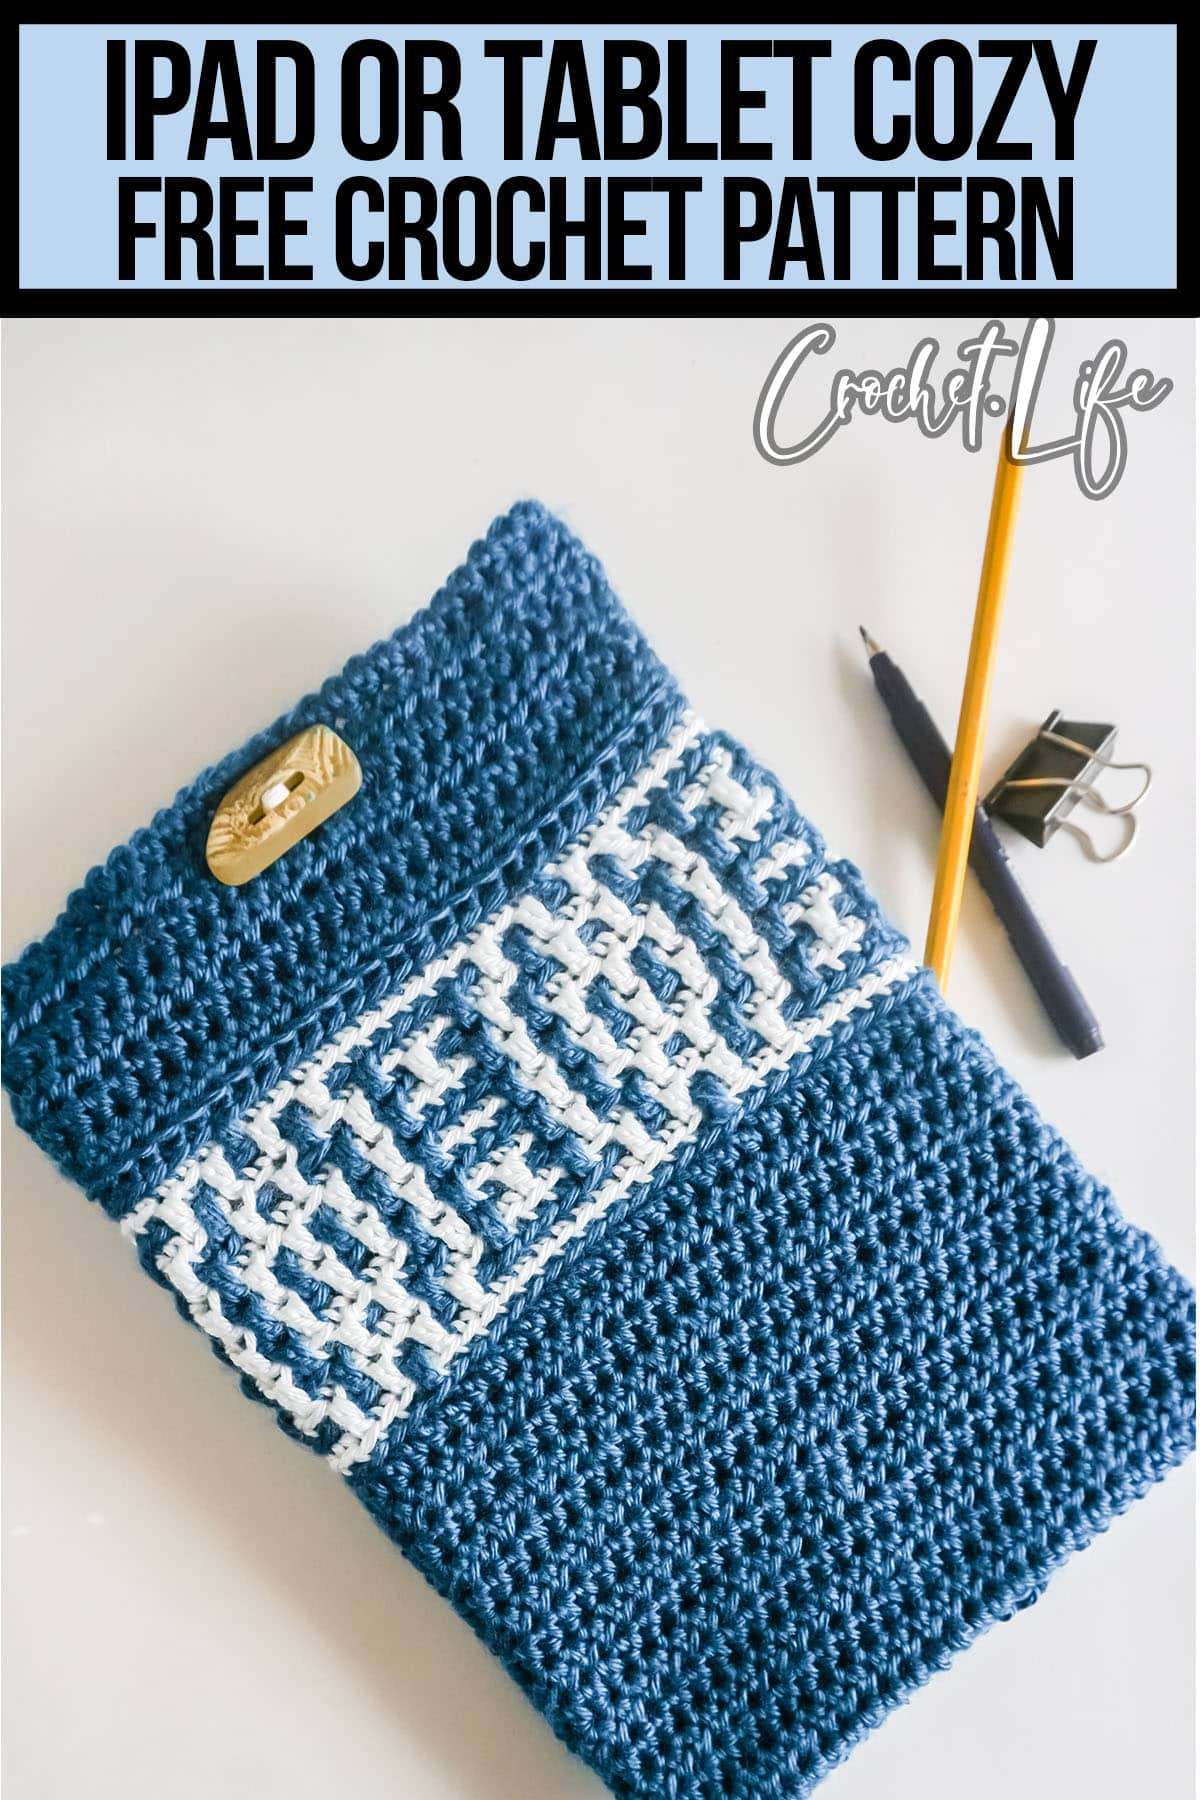 easy tablet or ipad case with text which reads ipad or tablet cozy free crochet pattern